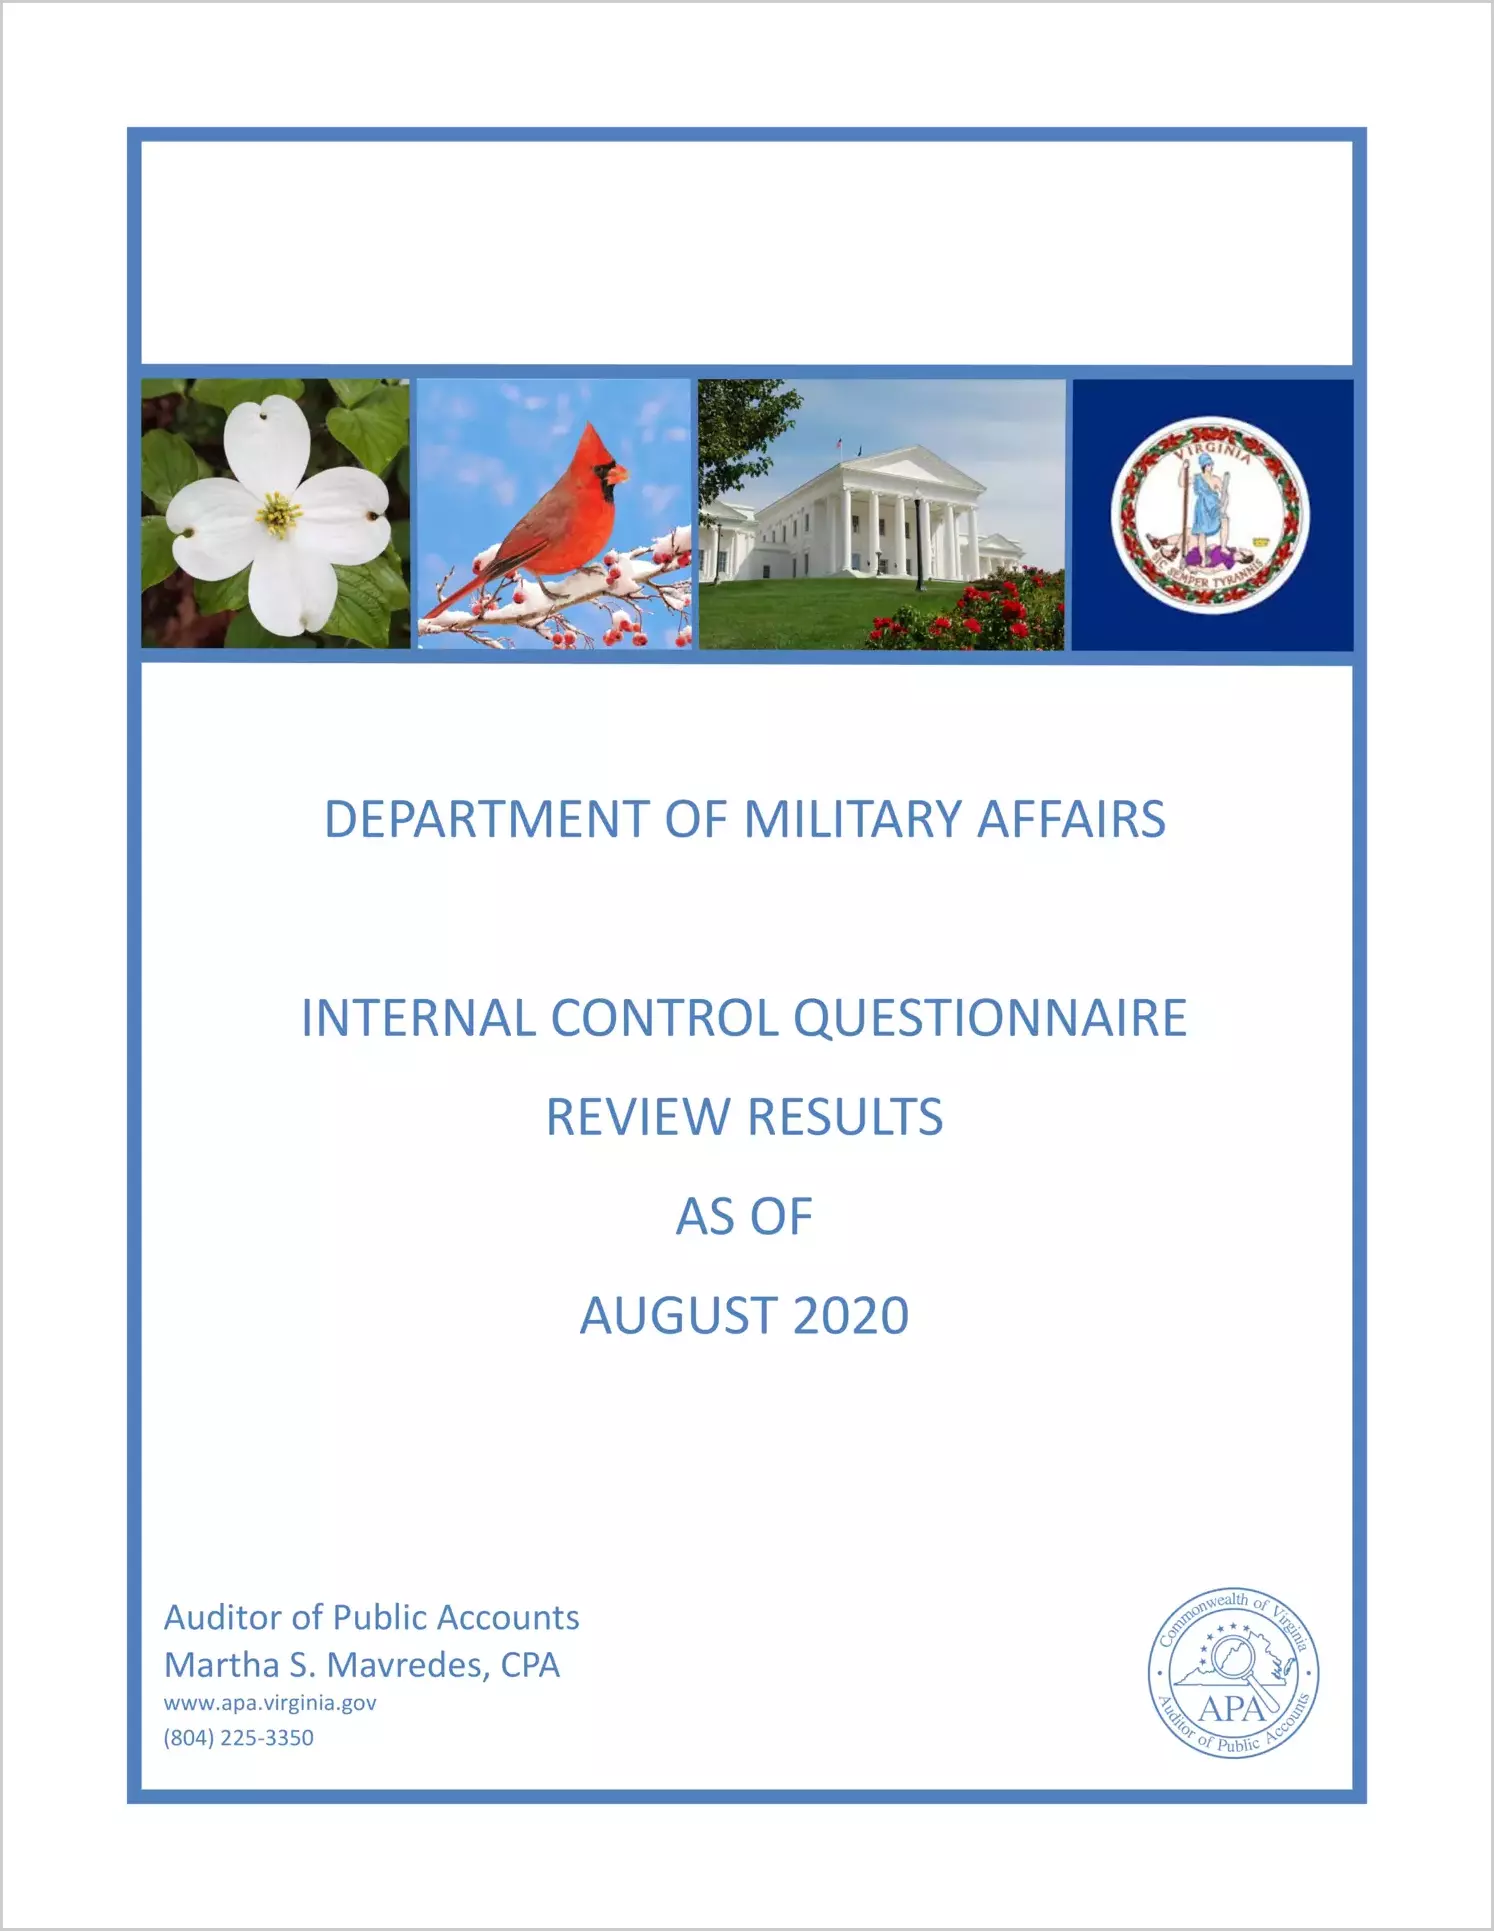 Department of Military Affairs Internal Control Questionnaire Review Results as of August 2020